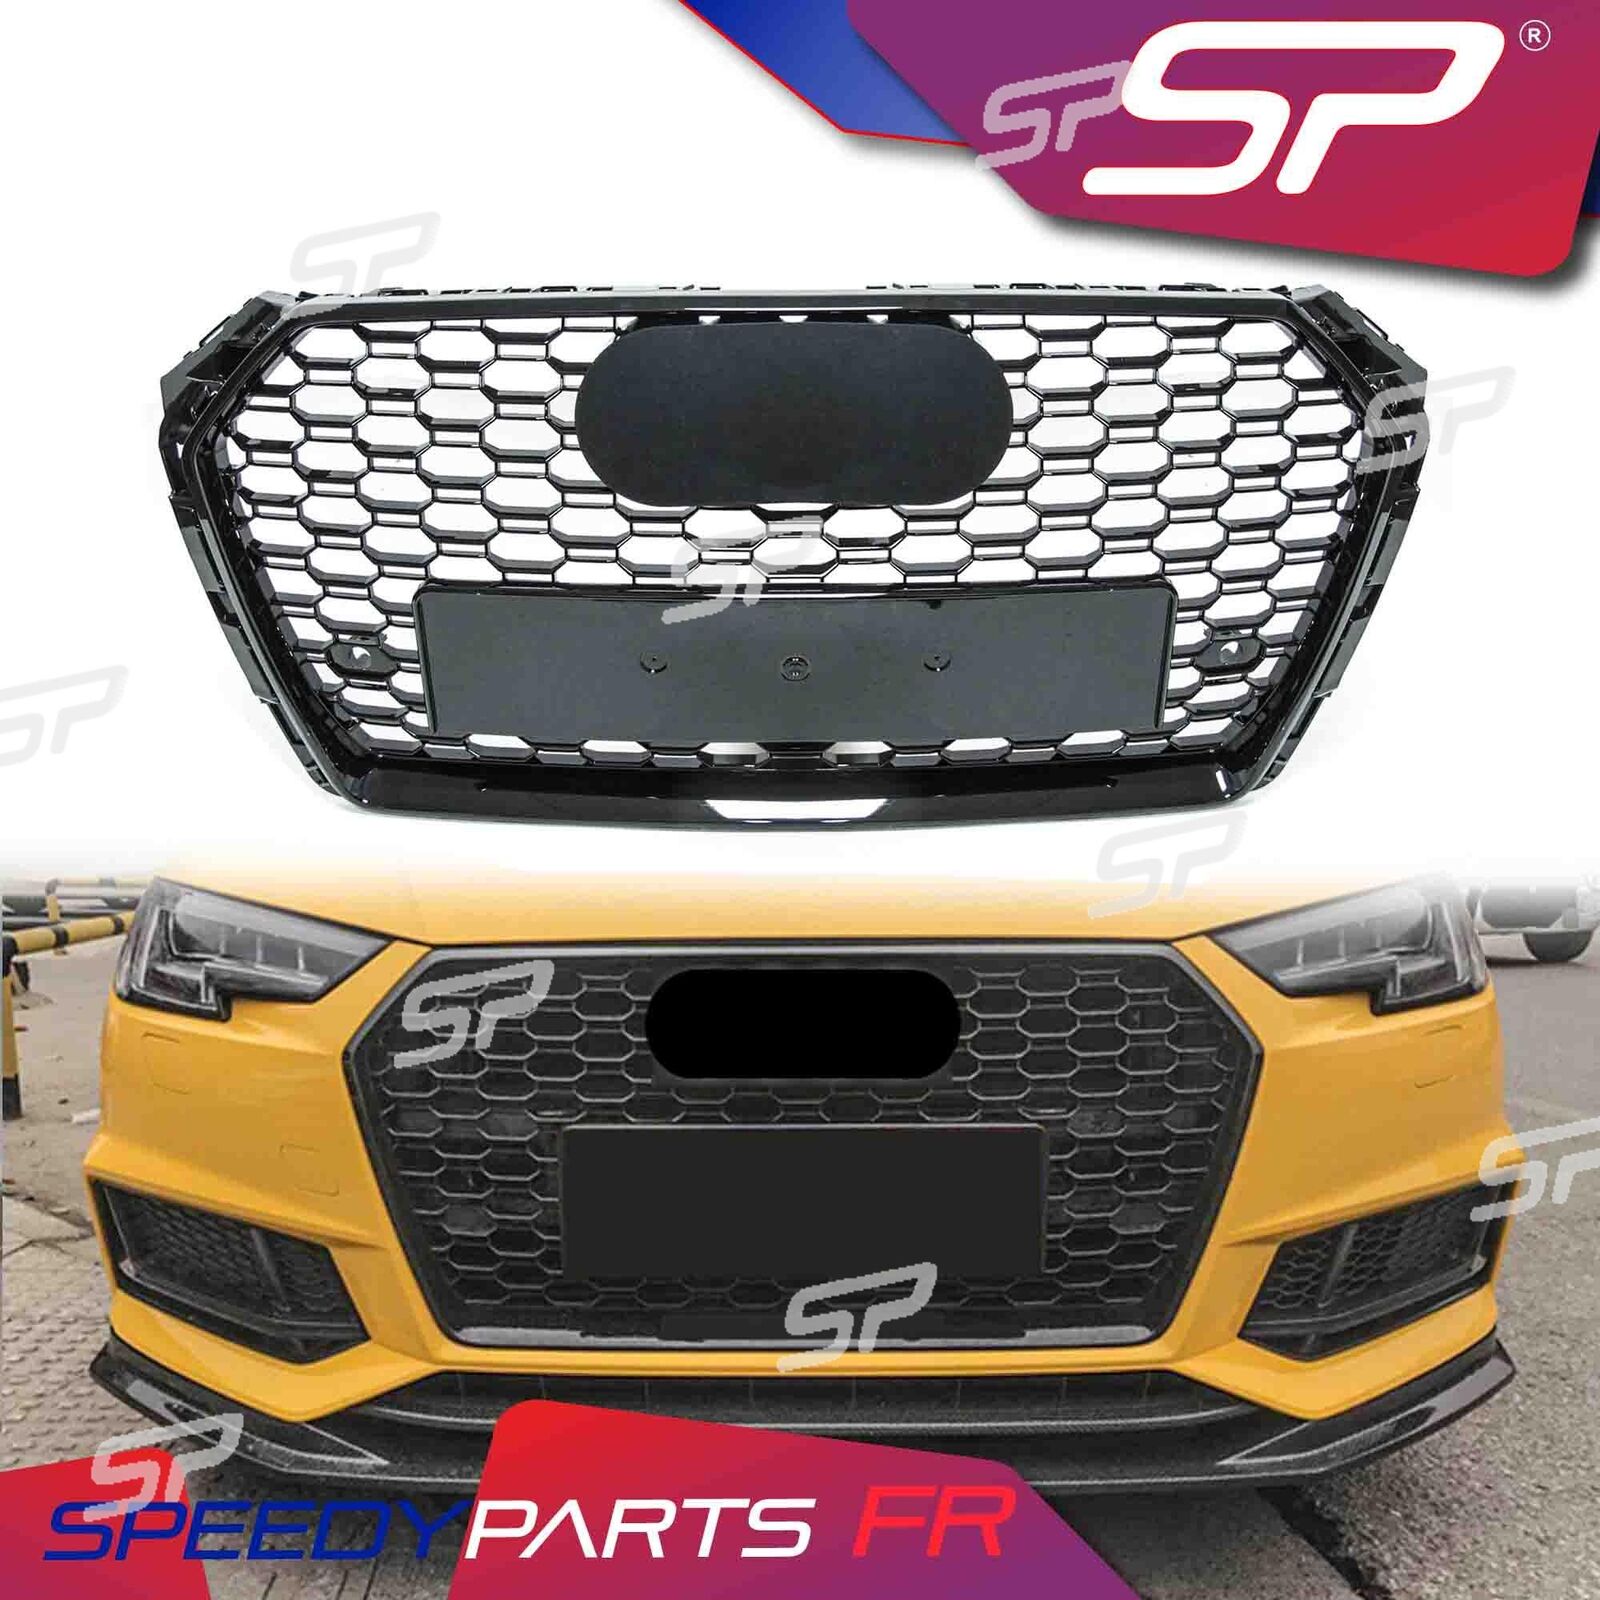 RS4 Style Front Bumper Grille Honeycomb Mesh Grill for Audi B9 A4 S4 2017-2019